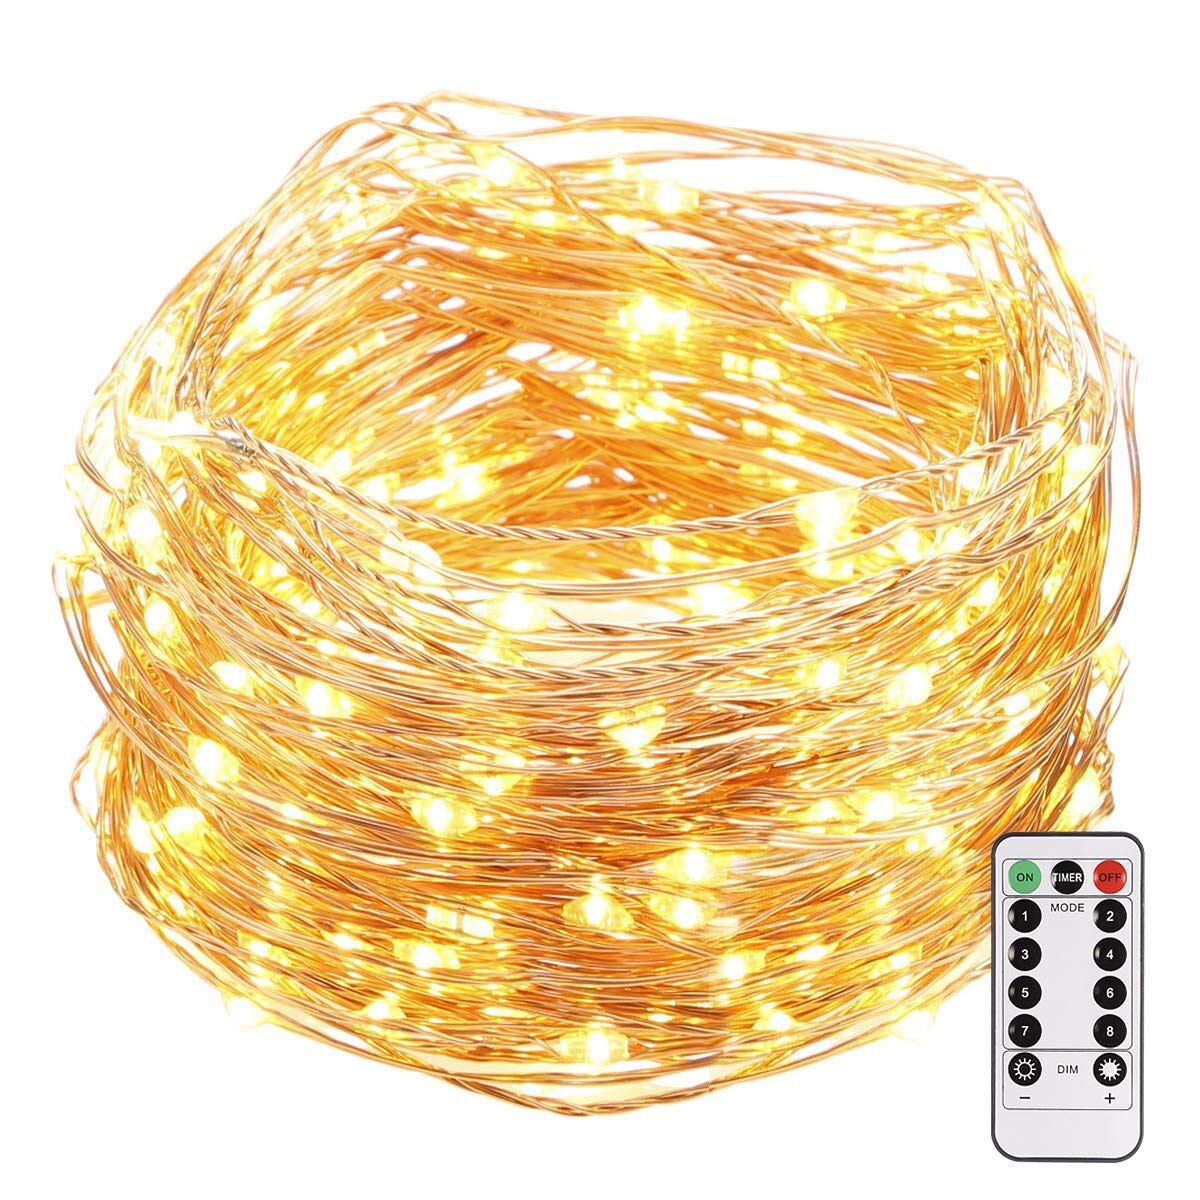 33 Feet 100 Led Fairy Lights Battery Operated with Remote Control Timer Waterproof Copper Wire Twinkle String Lights for Bedroom Indoor Outdoor Wedding Dorm Decor (Warm White) - image 1 of 8